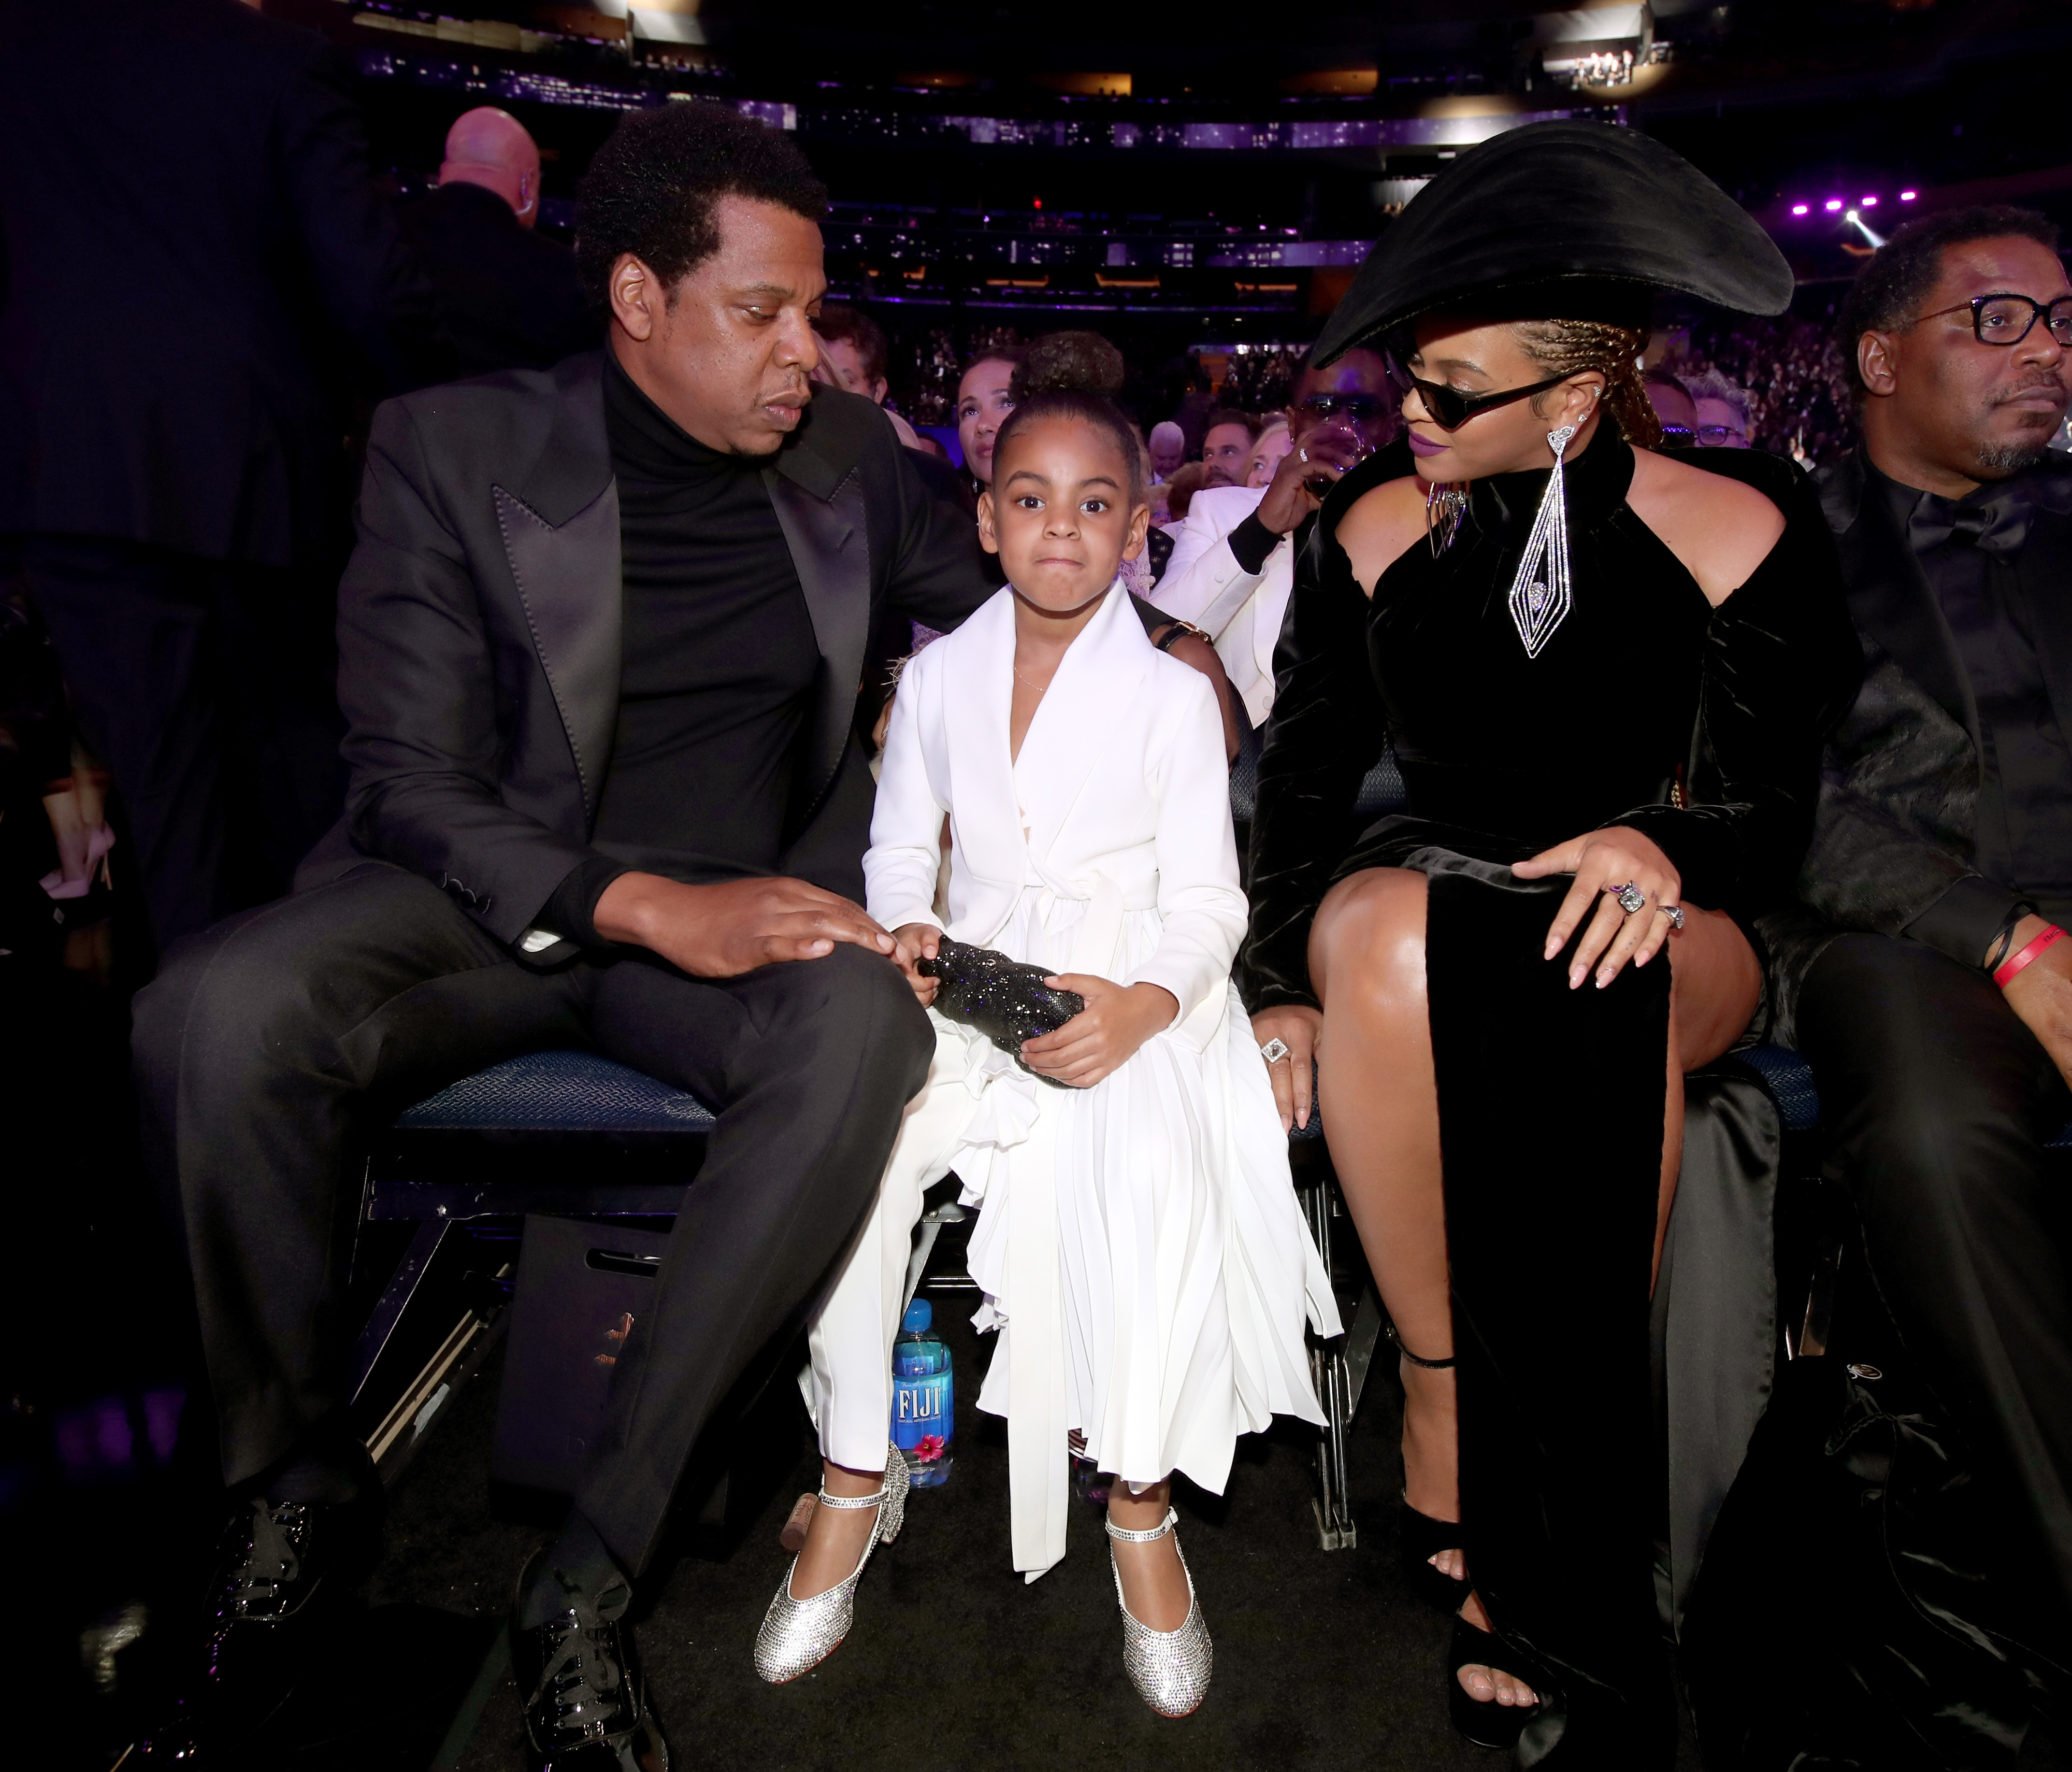 Beyoncé, Jay-Z, and Blue Ivy sitting together